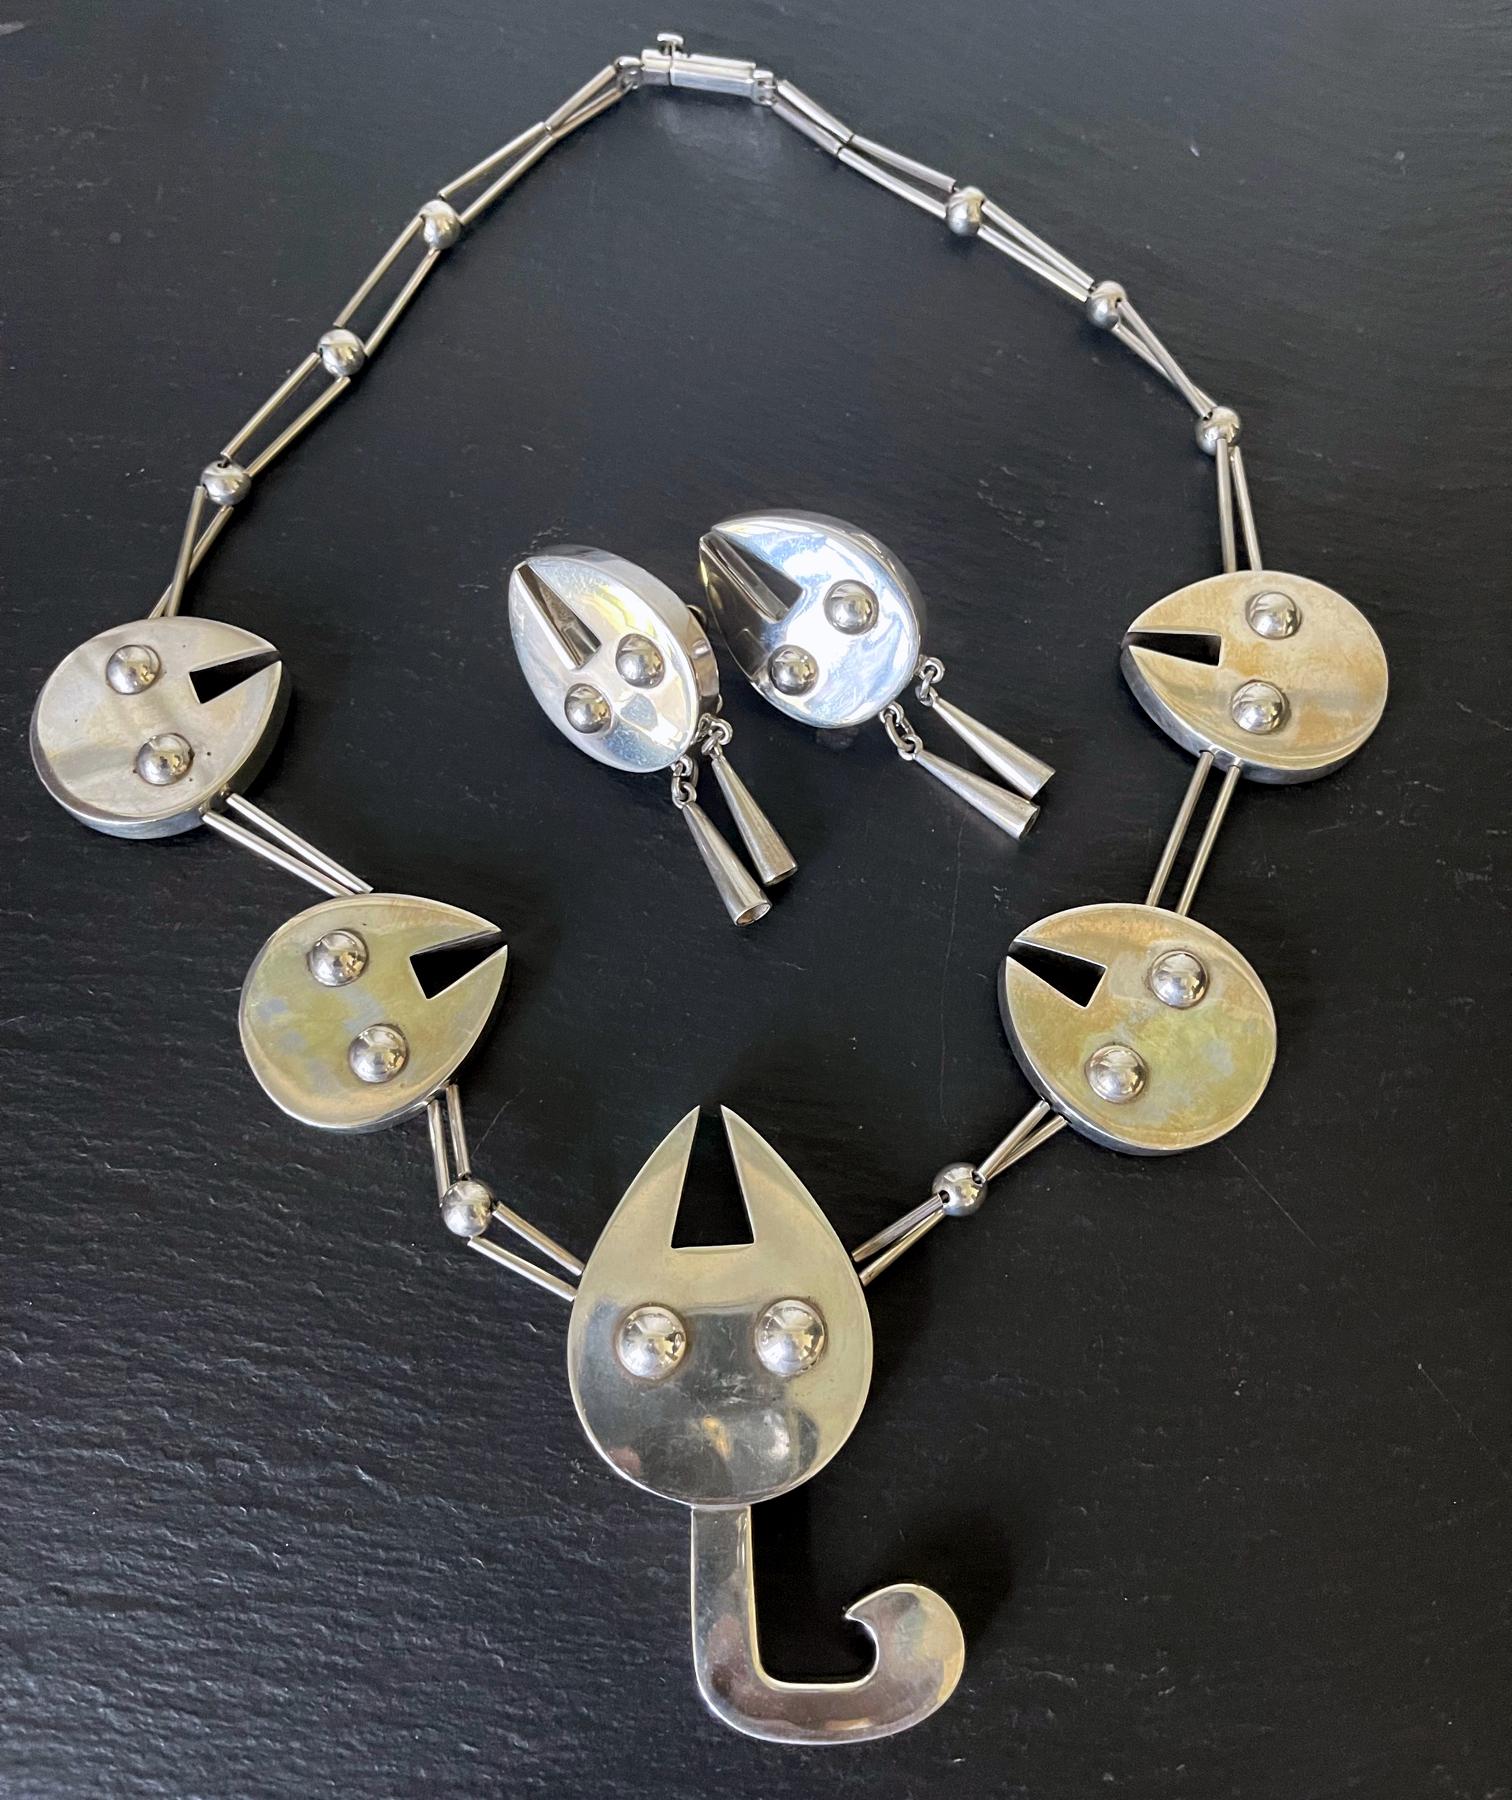 A three-piece sterling silver jewelry suite consisting of a necklace and a pair of earrings by Peruvian silversmith and designer Grazielle Laffi (1923-2009), Lima, circa 1970. Marks to necklace: PERU, 950. The main motif on the necklace and pedants